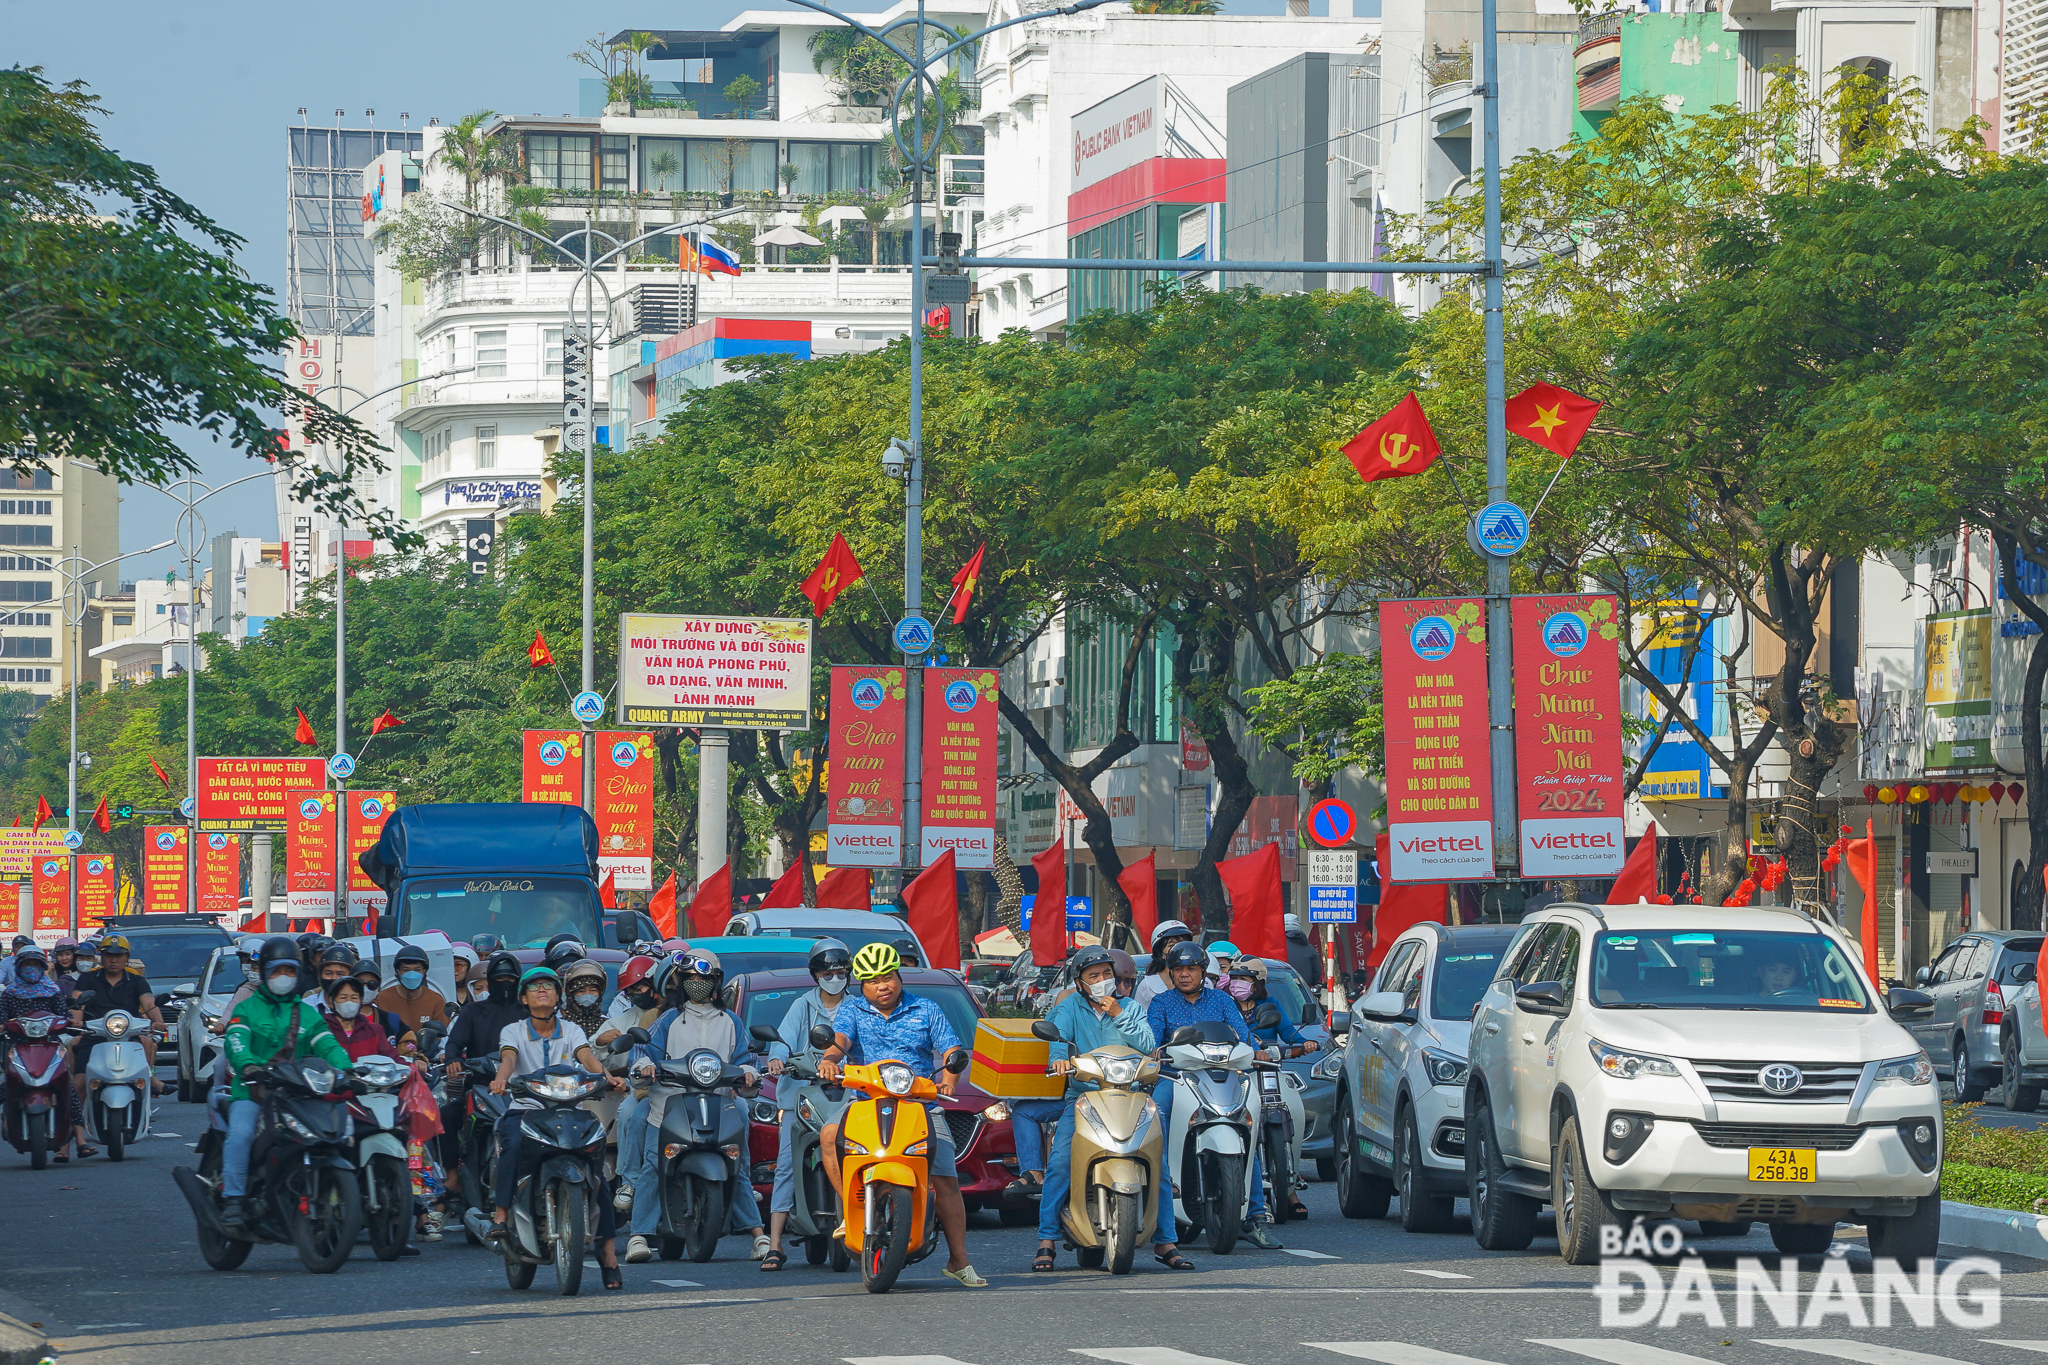 ... Vietnamese national flags, banners, panels, and slogans.